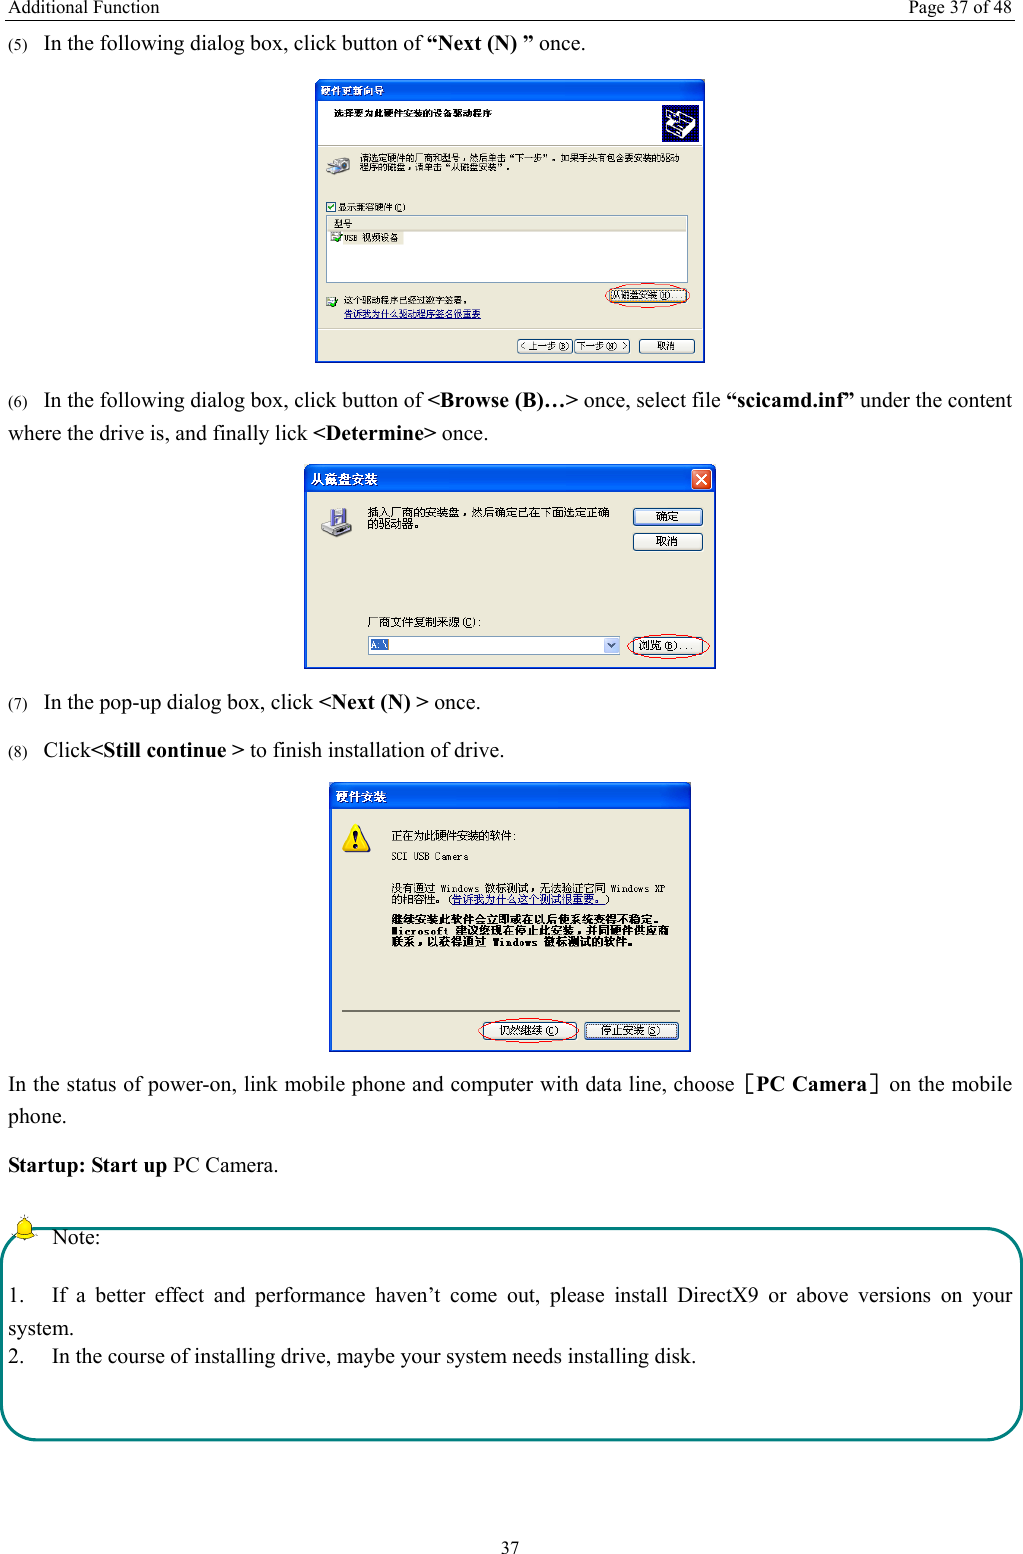 Additional Function  Page 37 of 48 37 (5) In the following dialog box, click button of “Next (N) ” once.  (6) In the following dialog box, click button of &lt;Browse (B)…&gt; once, select file “scicamd.inf” under the content where the drive is, and finally lick &lt;Determine&gt; once.  (7) In the pop-up dialog box, click &lt;Next (N) &gt; once. (8) Click&lt;Still continue &gt; to finish installation of drive.  In the status of power-on, link mobile phone and computer with data line, choose［PC Camera］on the mobile phone. Startup: Start up PC Camera.  Note: 1.  If a better effect and performance haven’t come out, please install DirectX9 or above versions on your system.  2.  In the course of installing drive, maybe your system needs installing disk.    